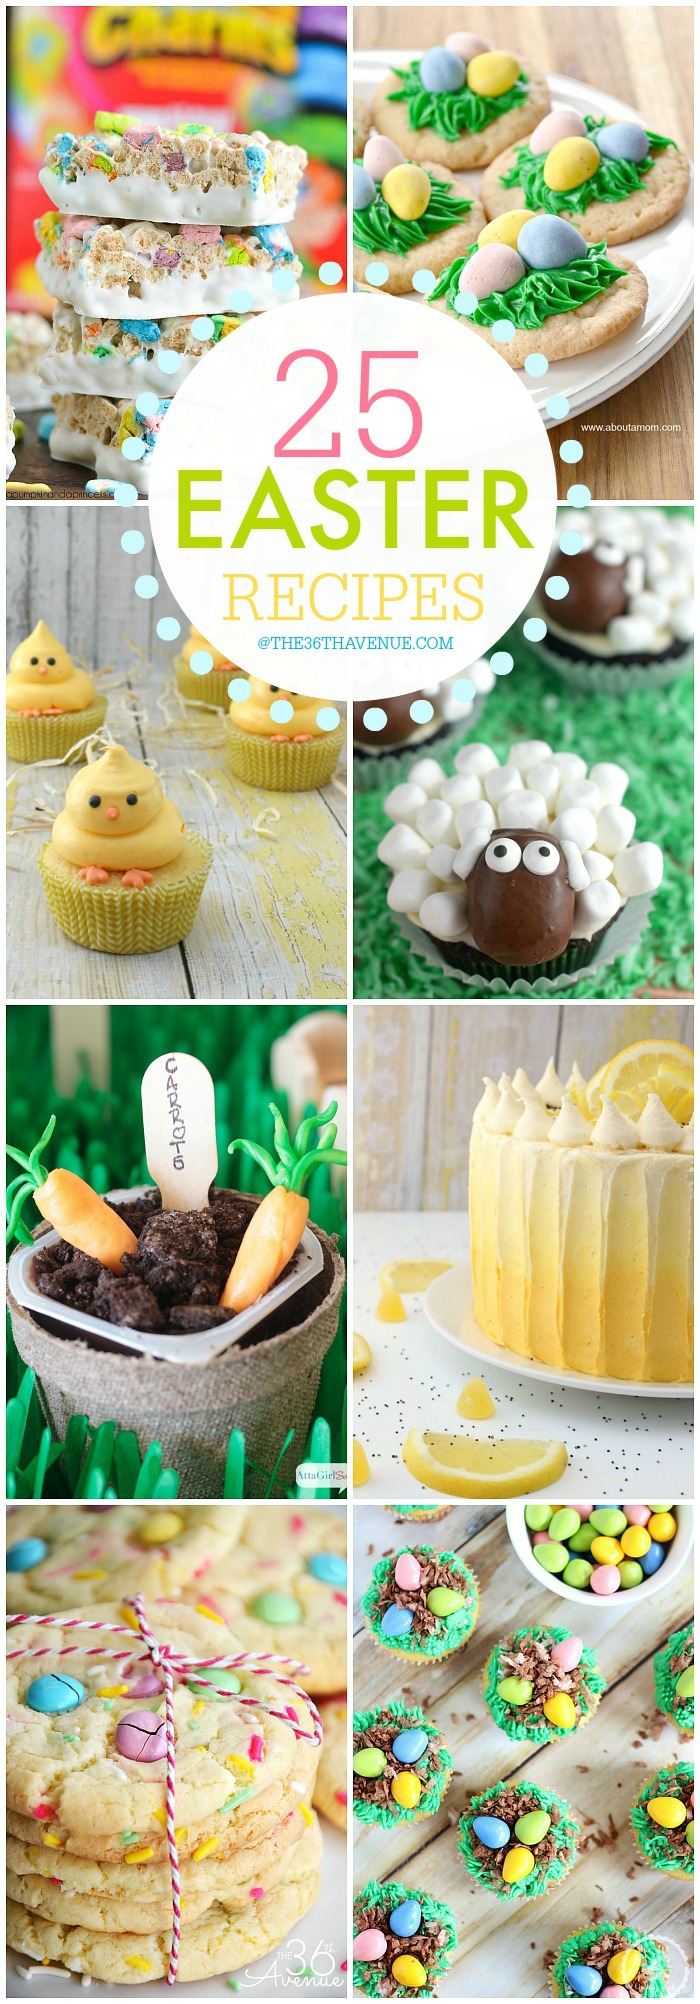 25 Easter Recipes at the36thavenue.com